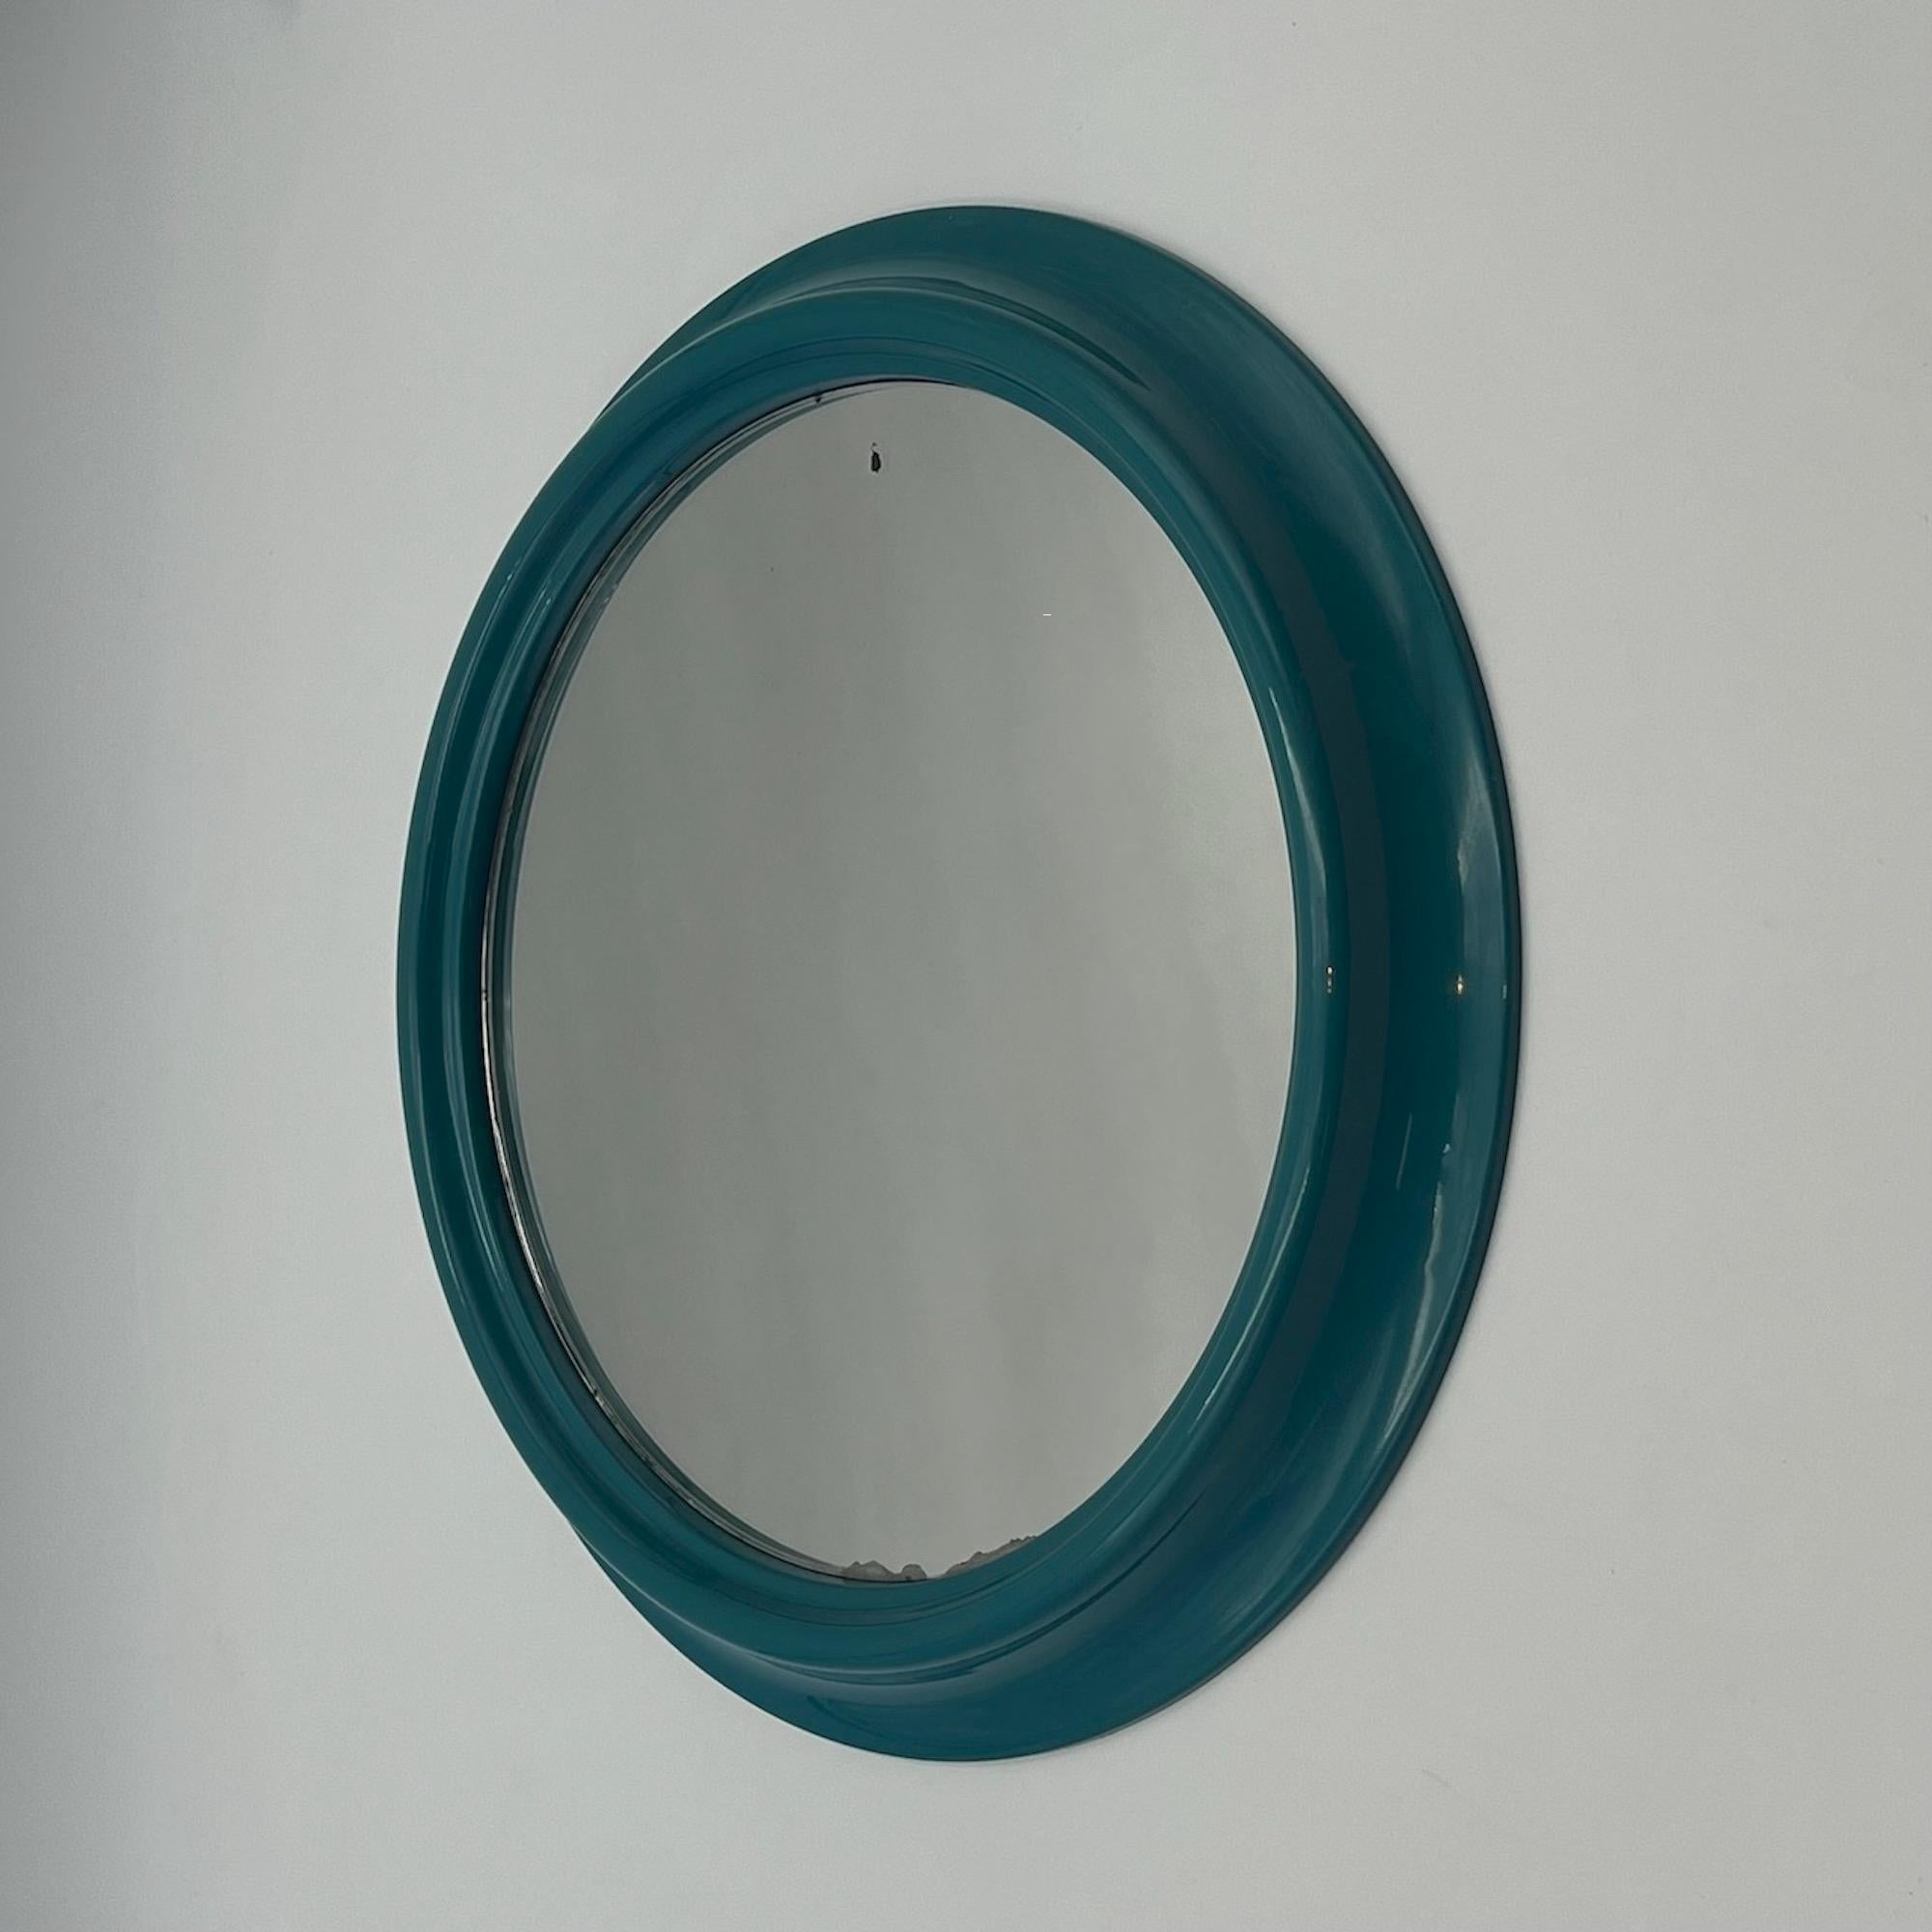 Space Age Vintage Round Wall Mirror in Turquoise Blue Made in Italy, 1970s For Sale